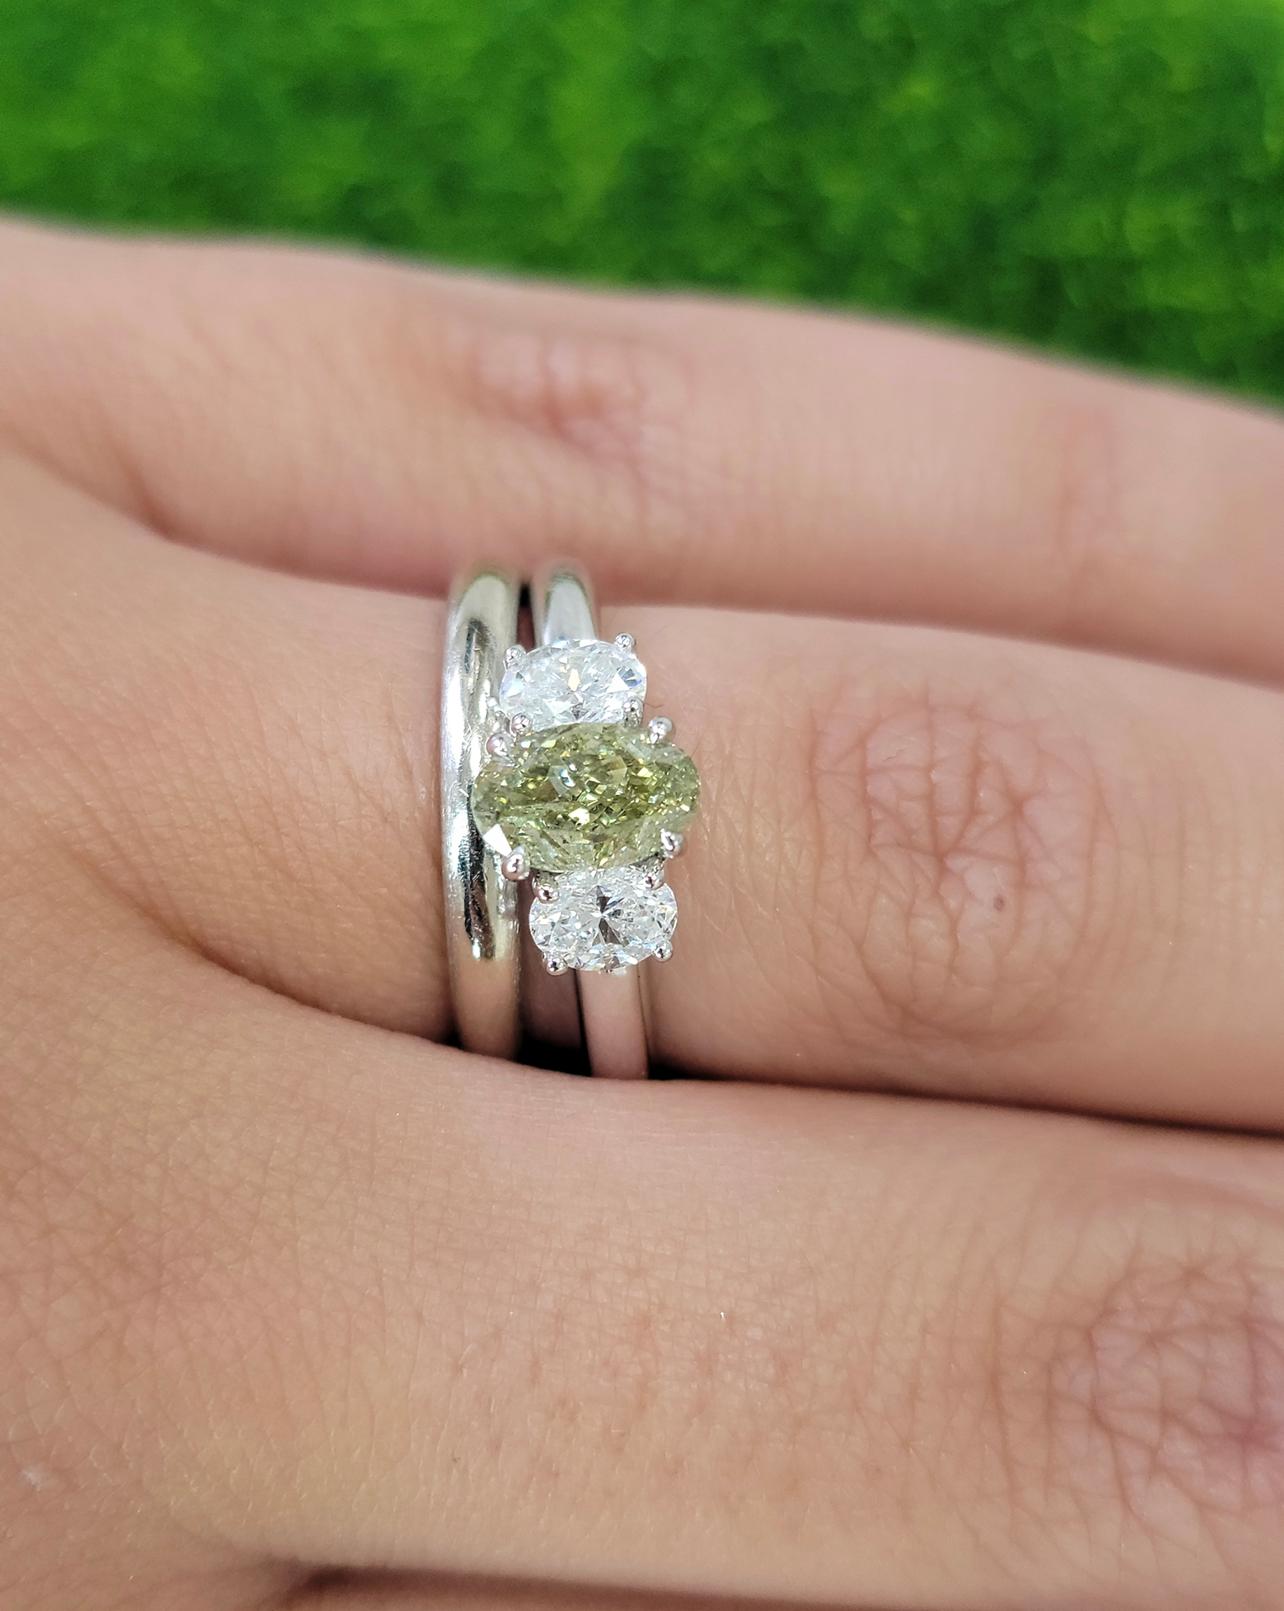 Natural color changing diamond certified as a Fancy Greenish Yellow but facing up predominantly Green. When the stone is left in the dark or heated the door temporarily changes to yellow
Set in 18kt White Gold with 0.59ct total weight of white